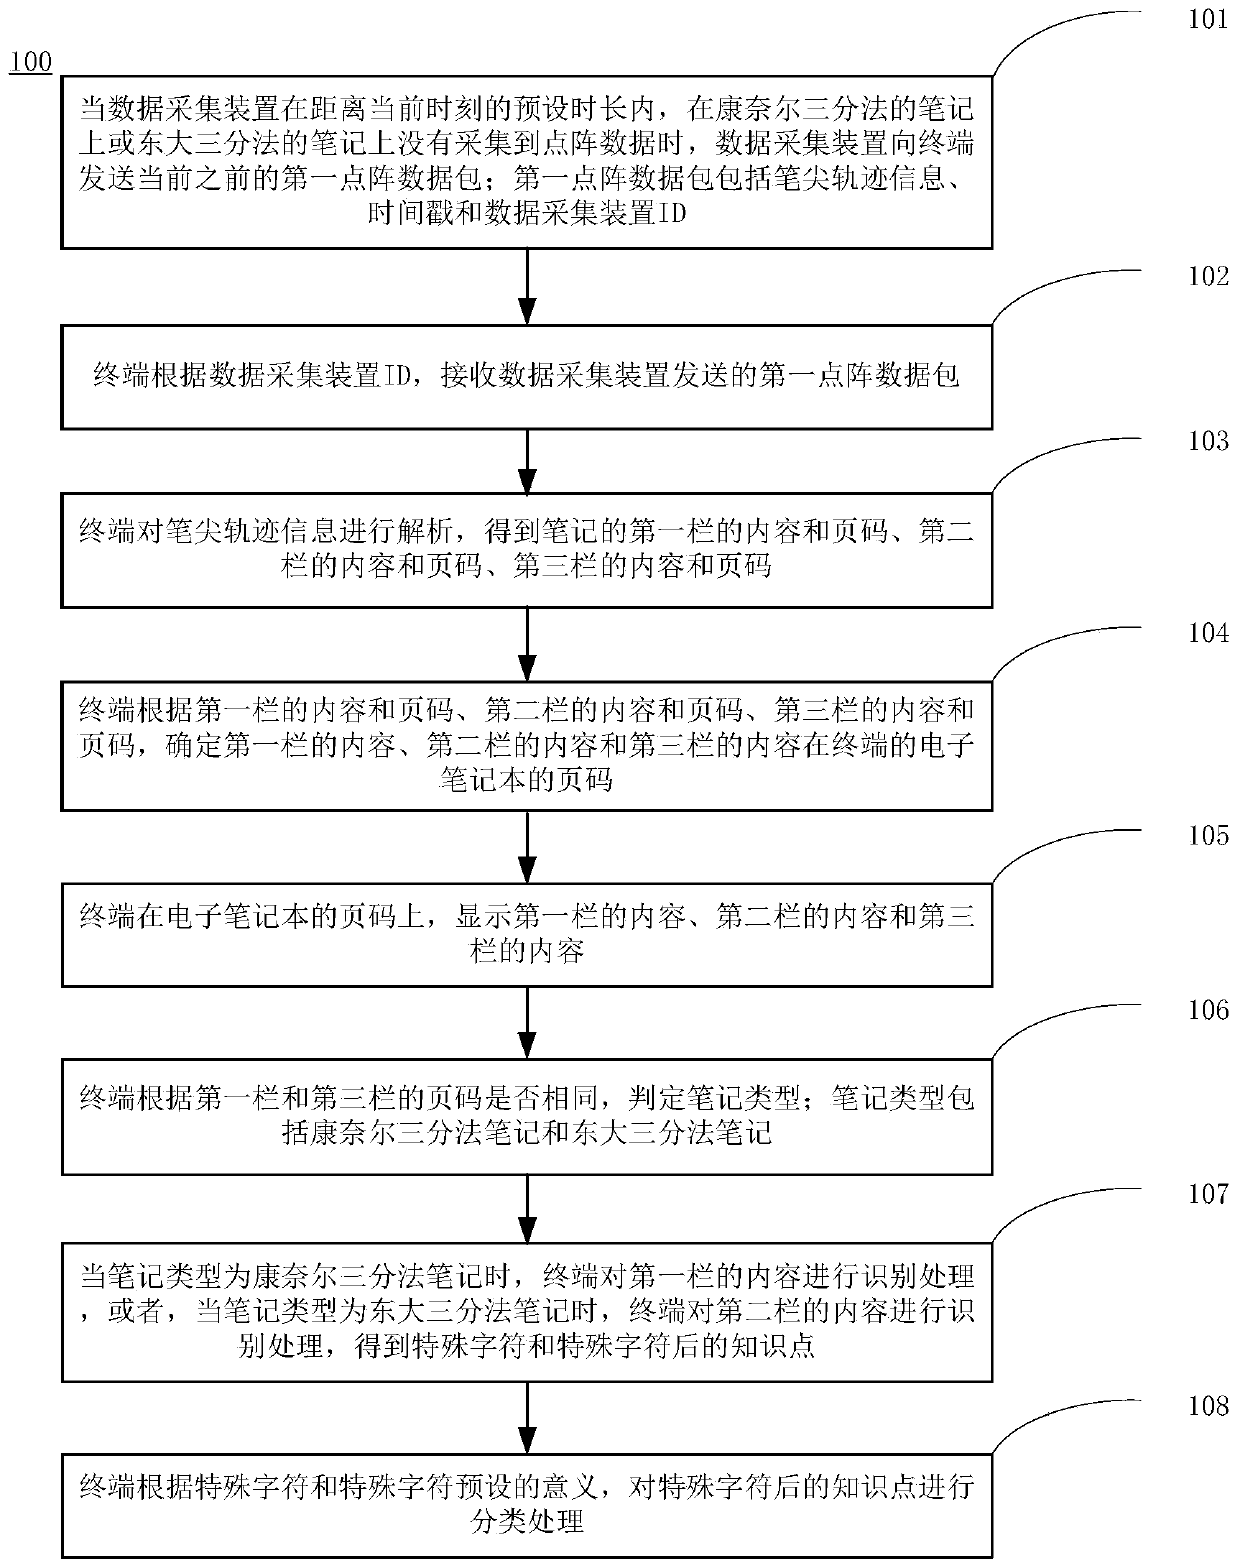 Dot matrix paper pen technology application method combined with Connell or Dongda note method